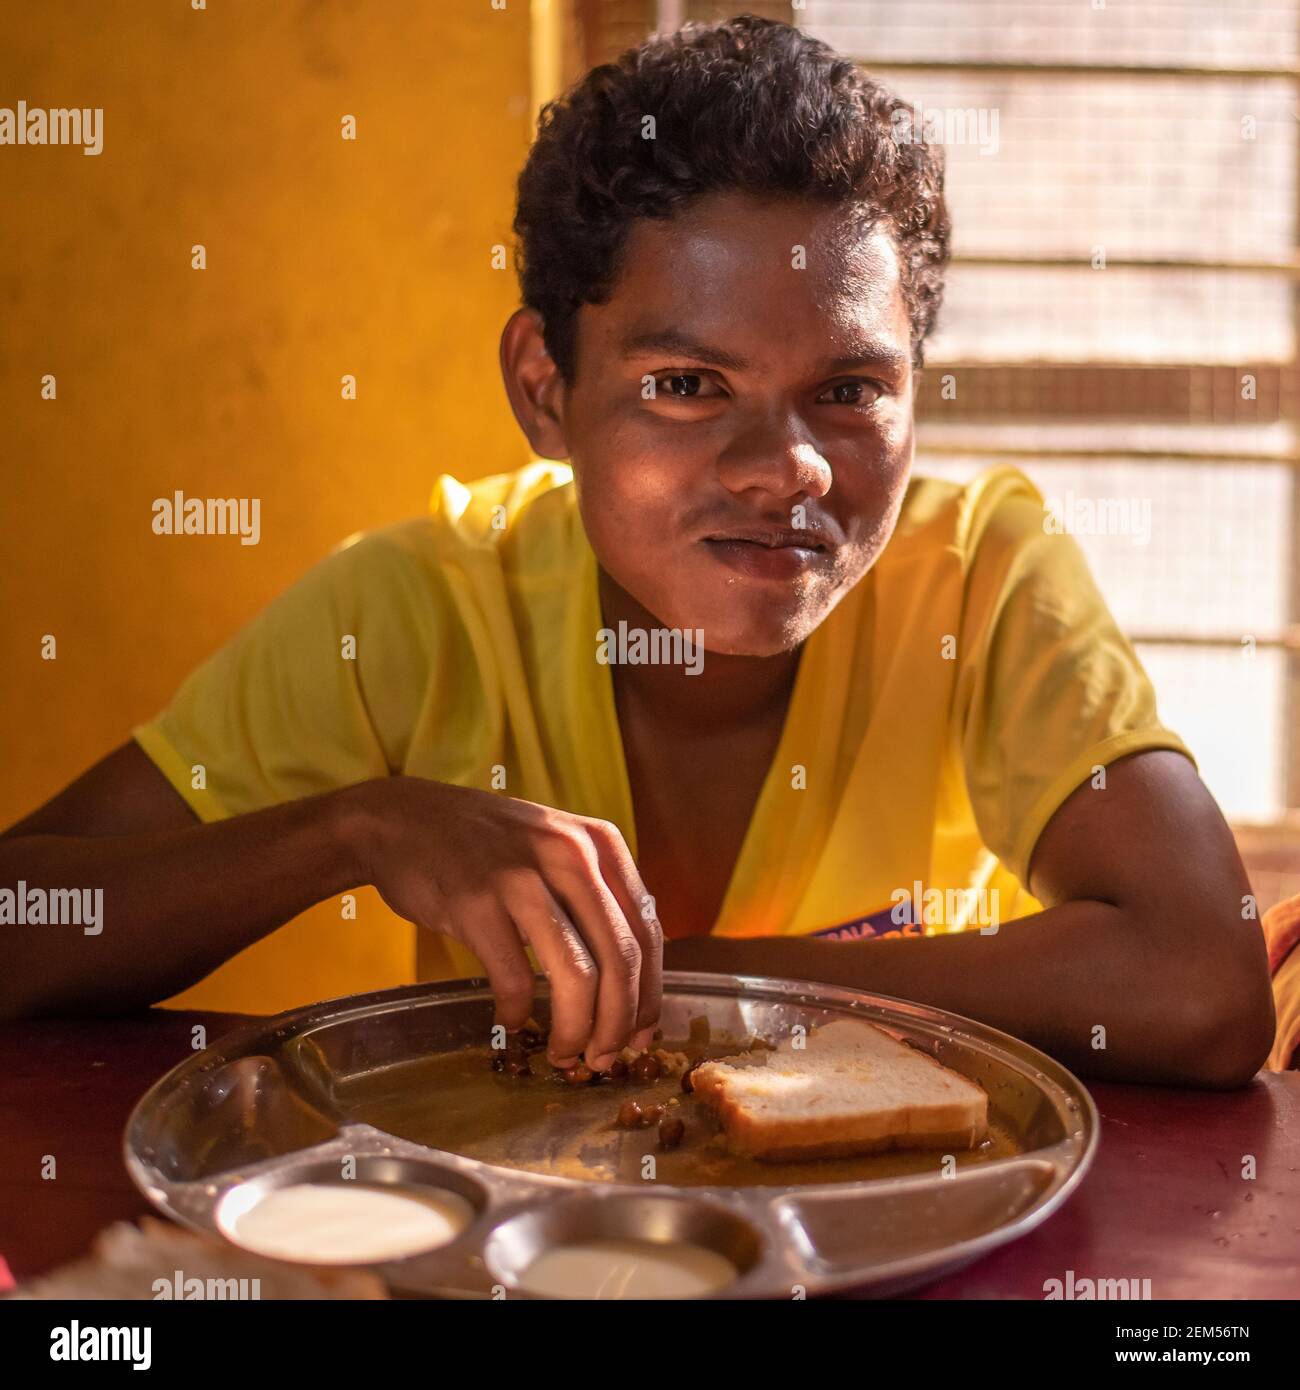 Rajasthan. India. 07-02-2018. Portrait of a male adolescent after finishing his lunch at school. Stock Photo